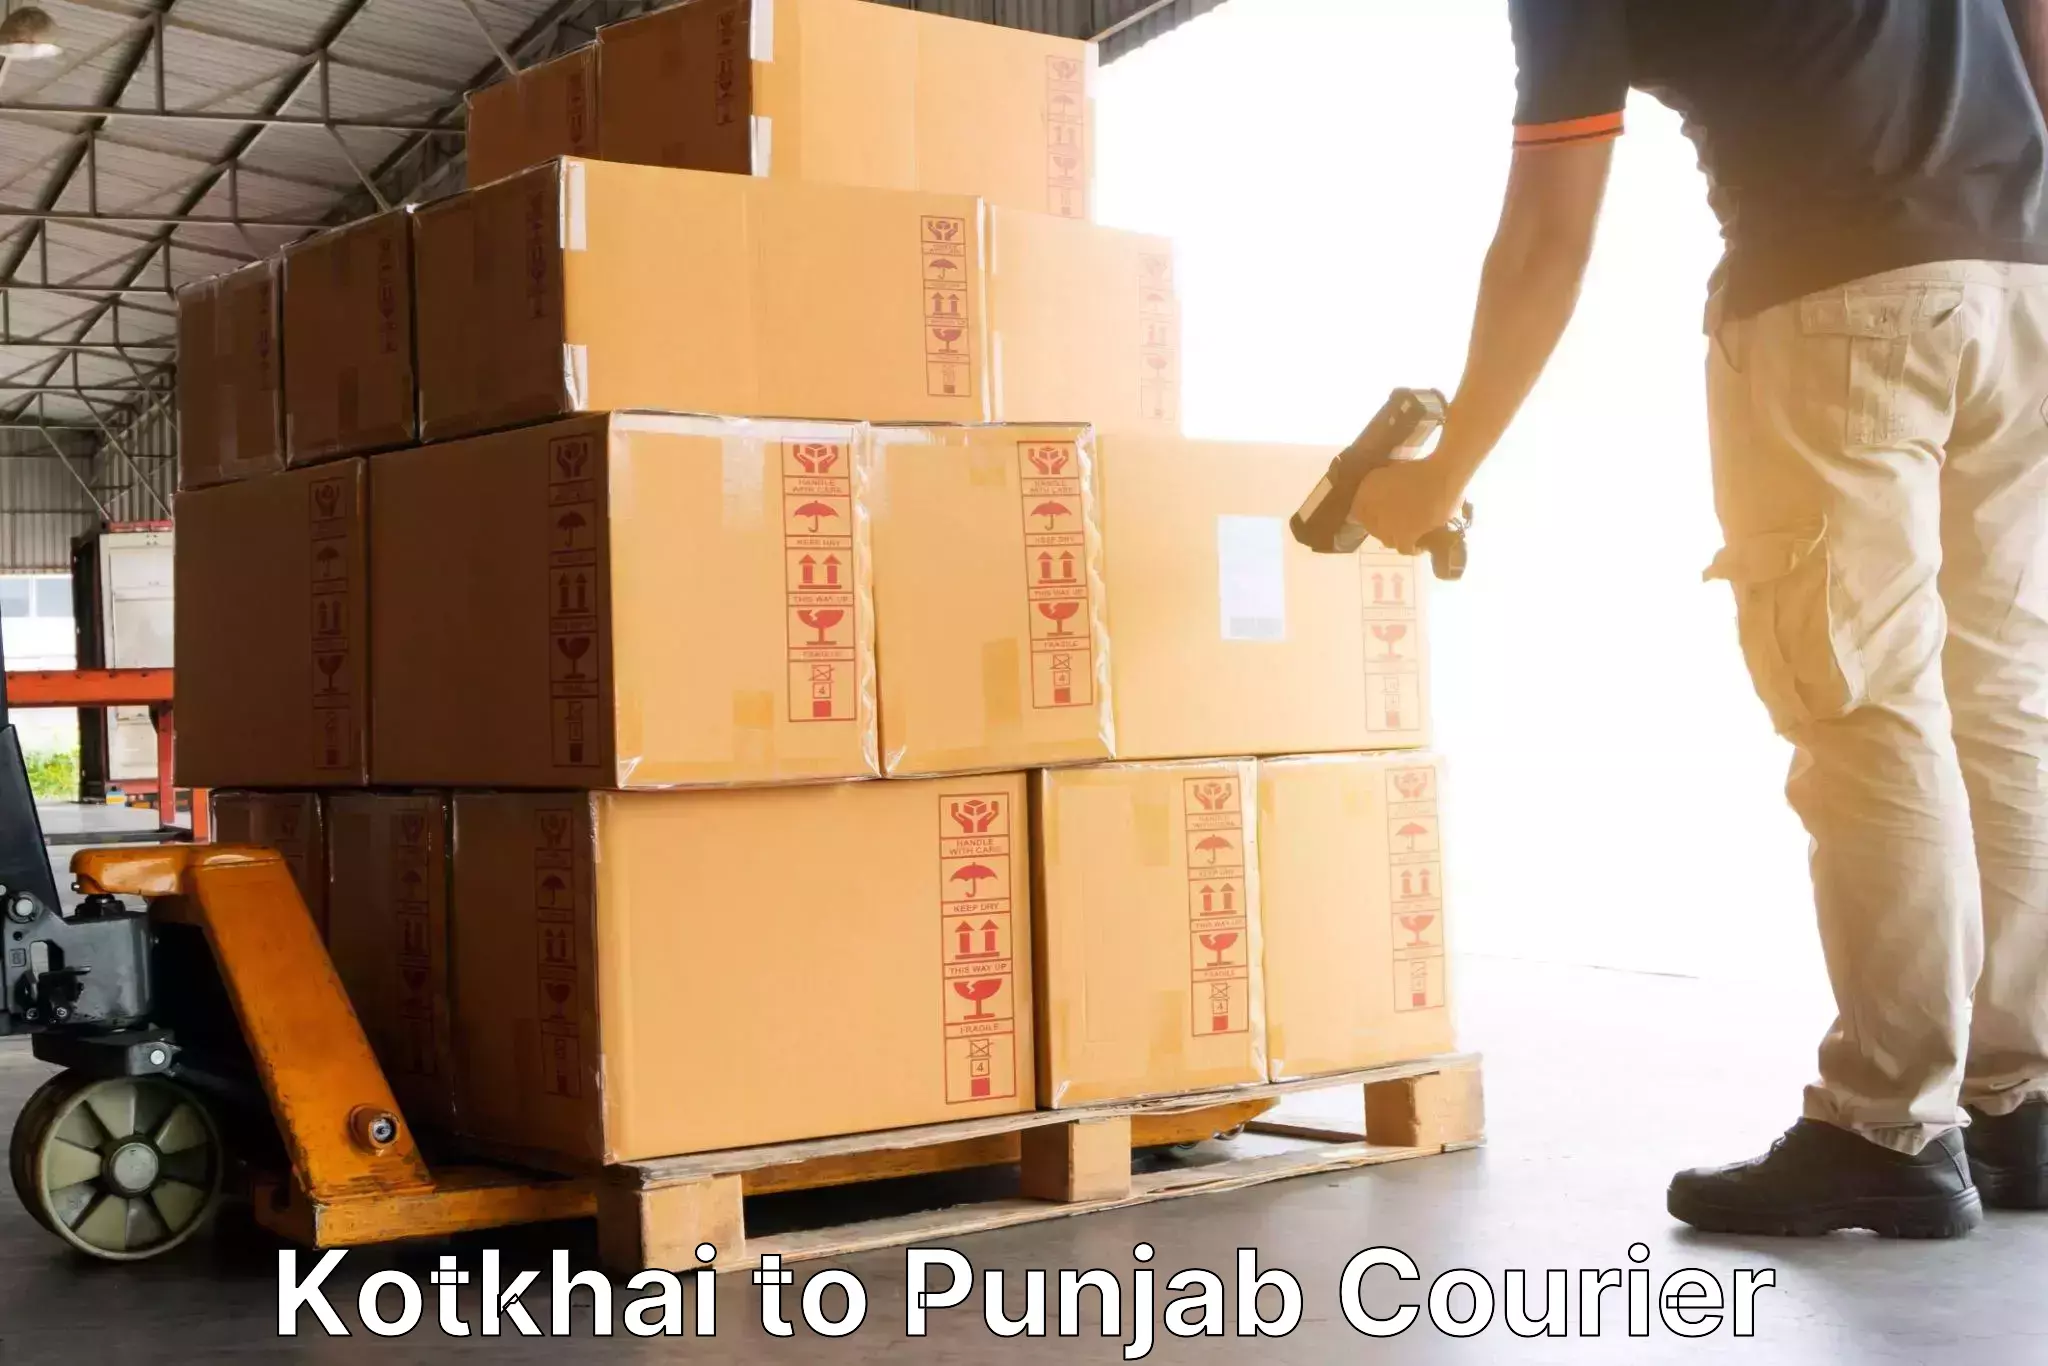 Streamlined delivery processes in Kotkhai to Ludhiana